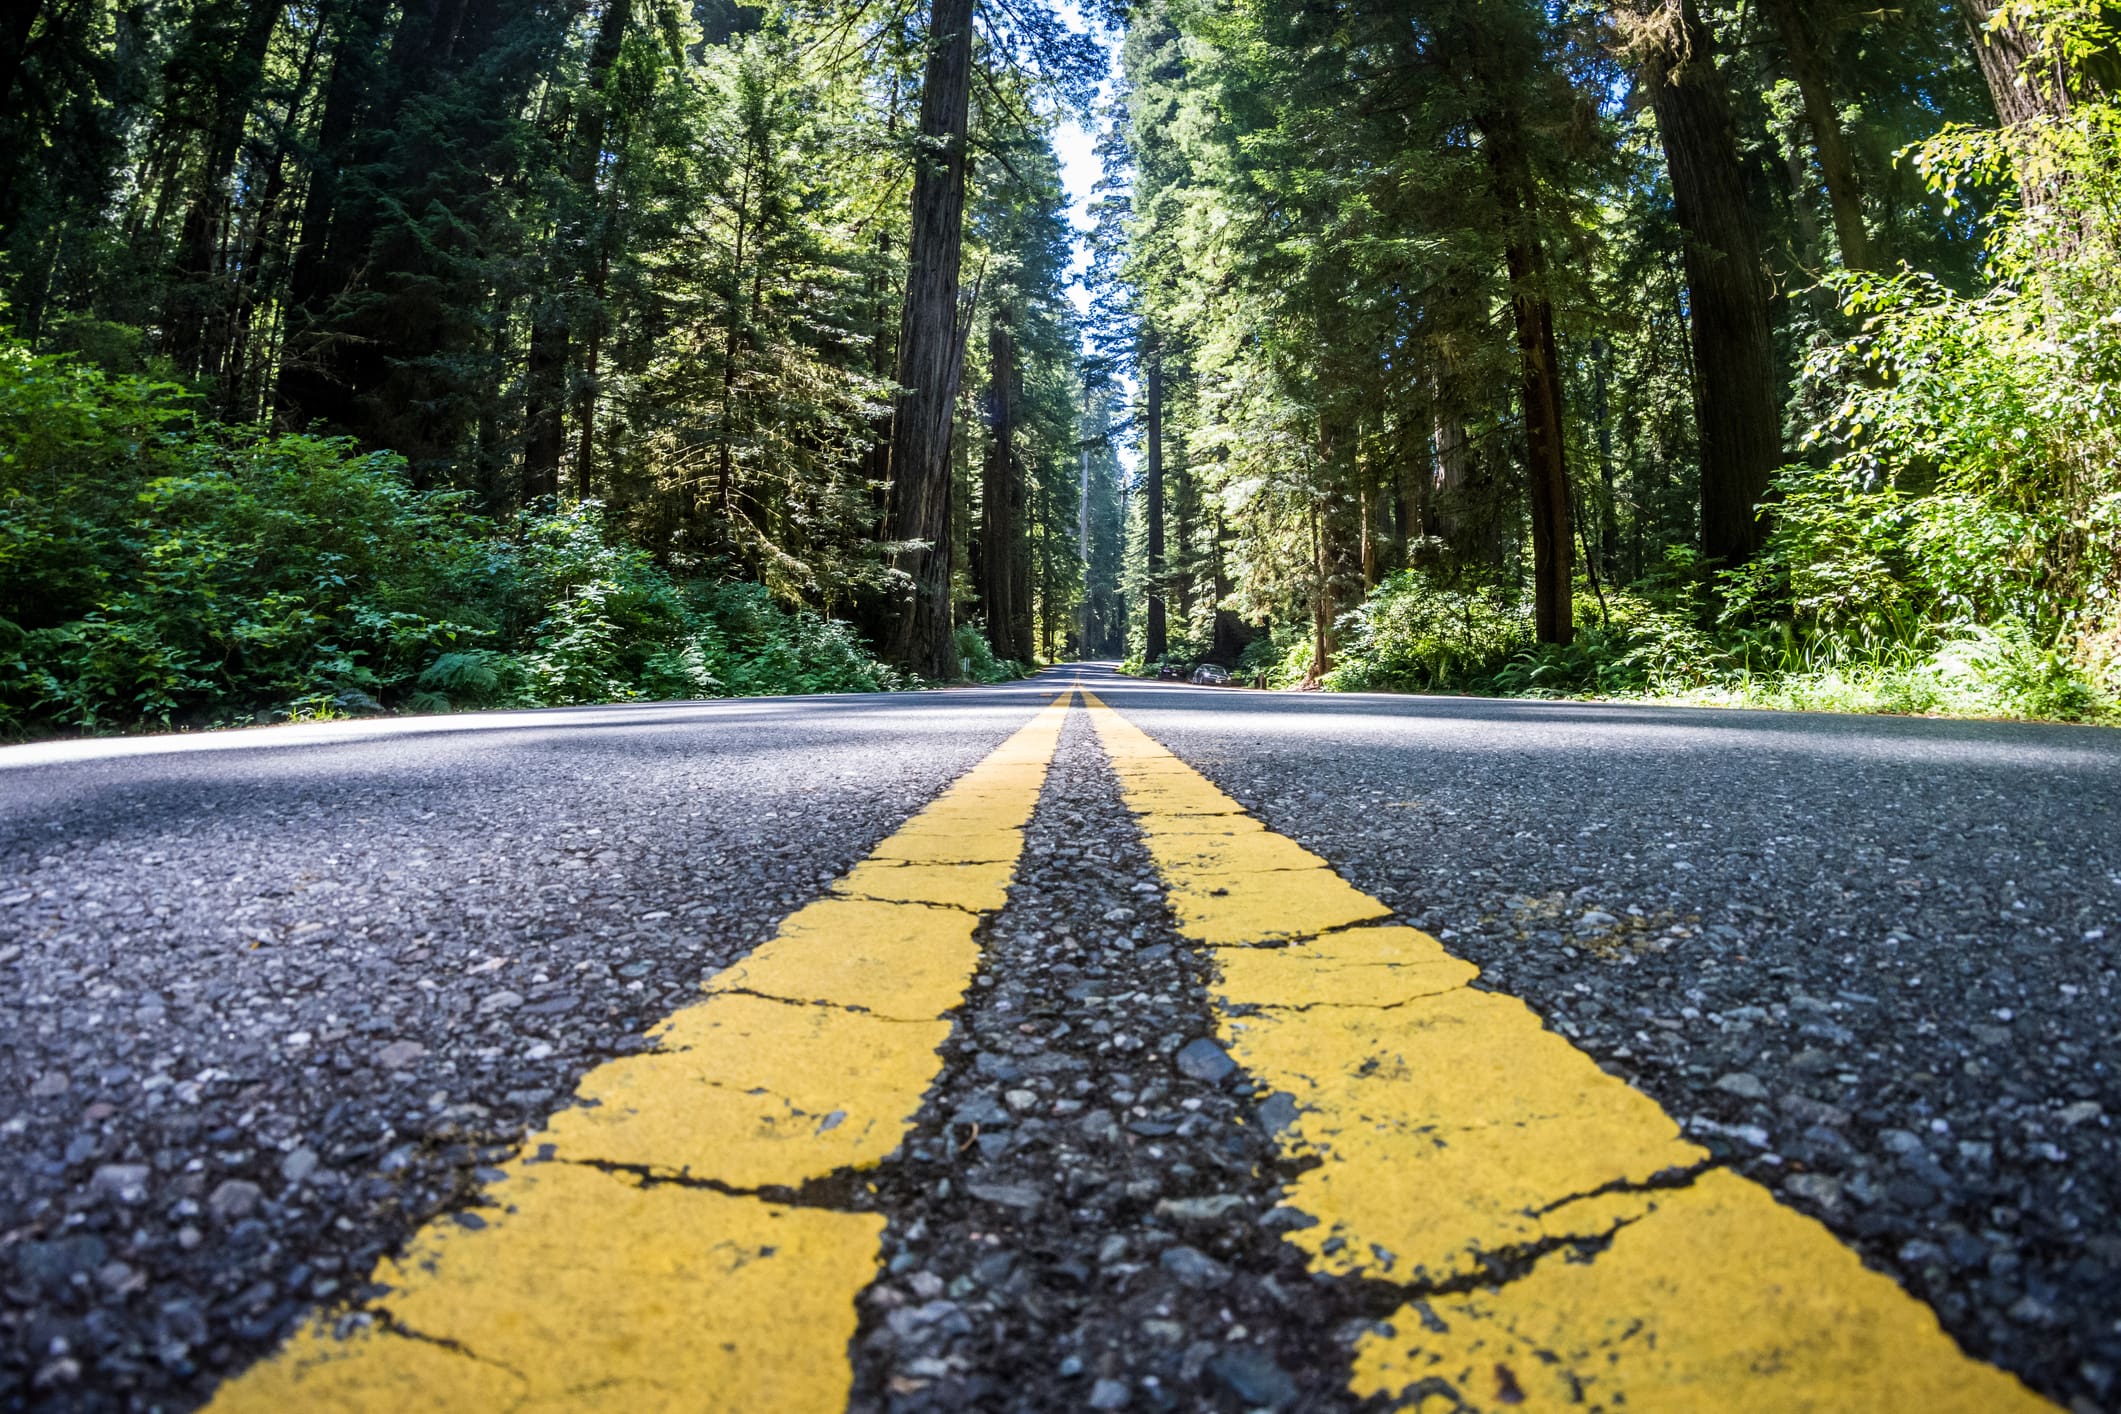 Image of Road surrounded by forest in Washington